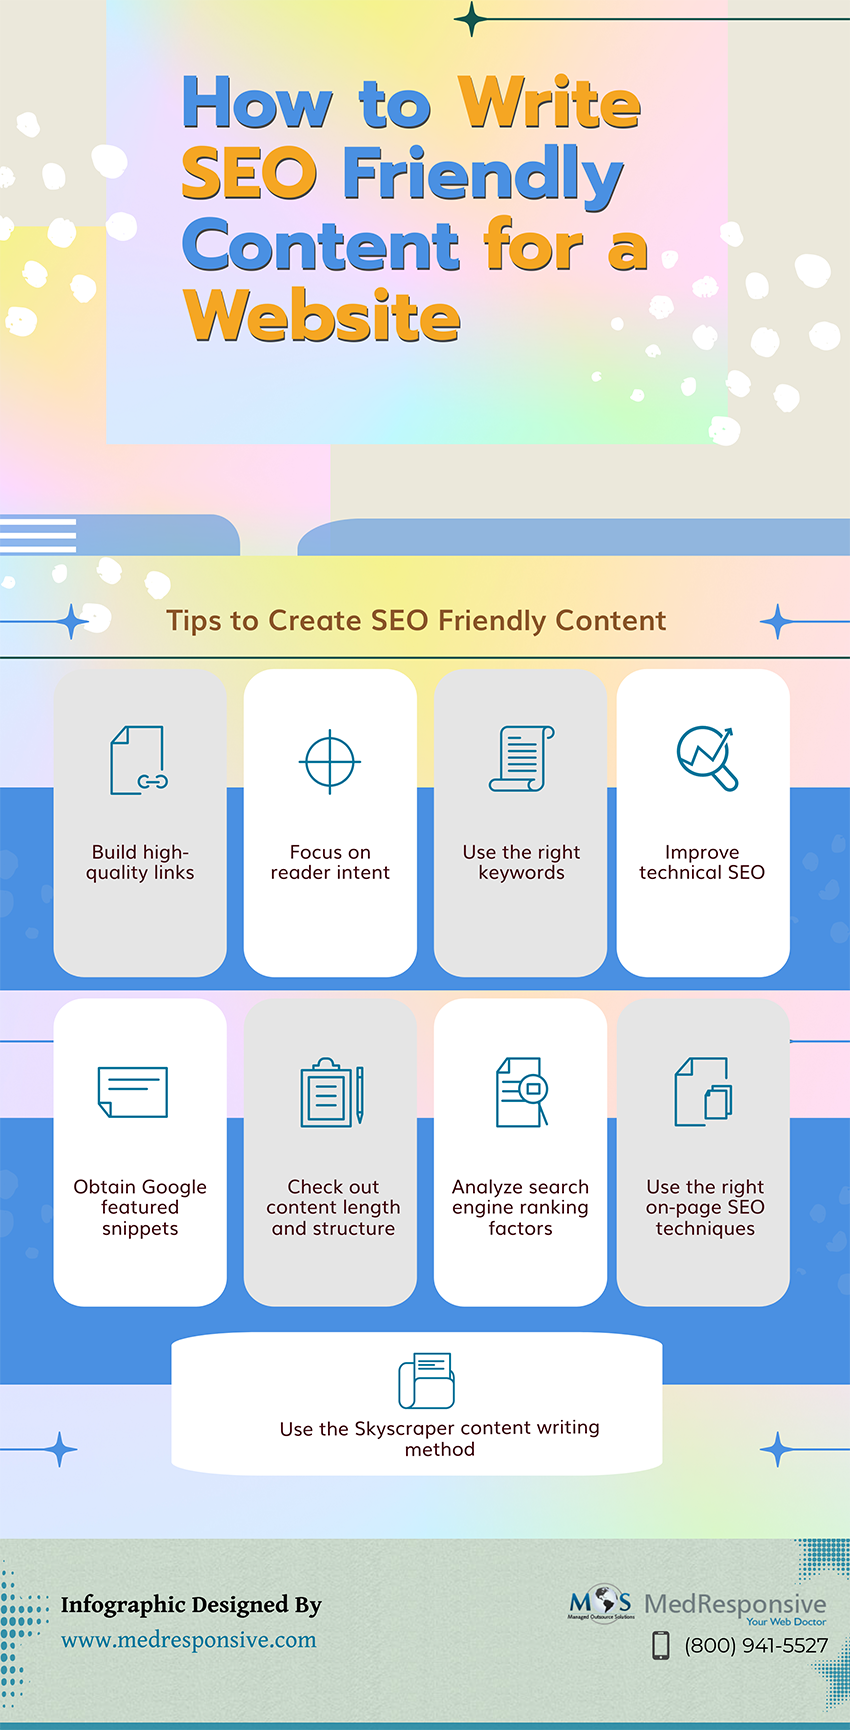 SEO Friendly Content for a Website